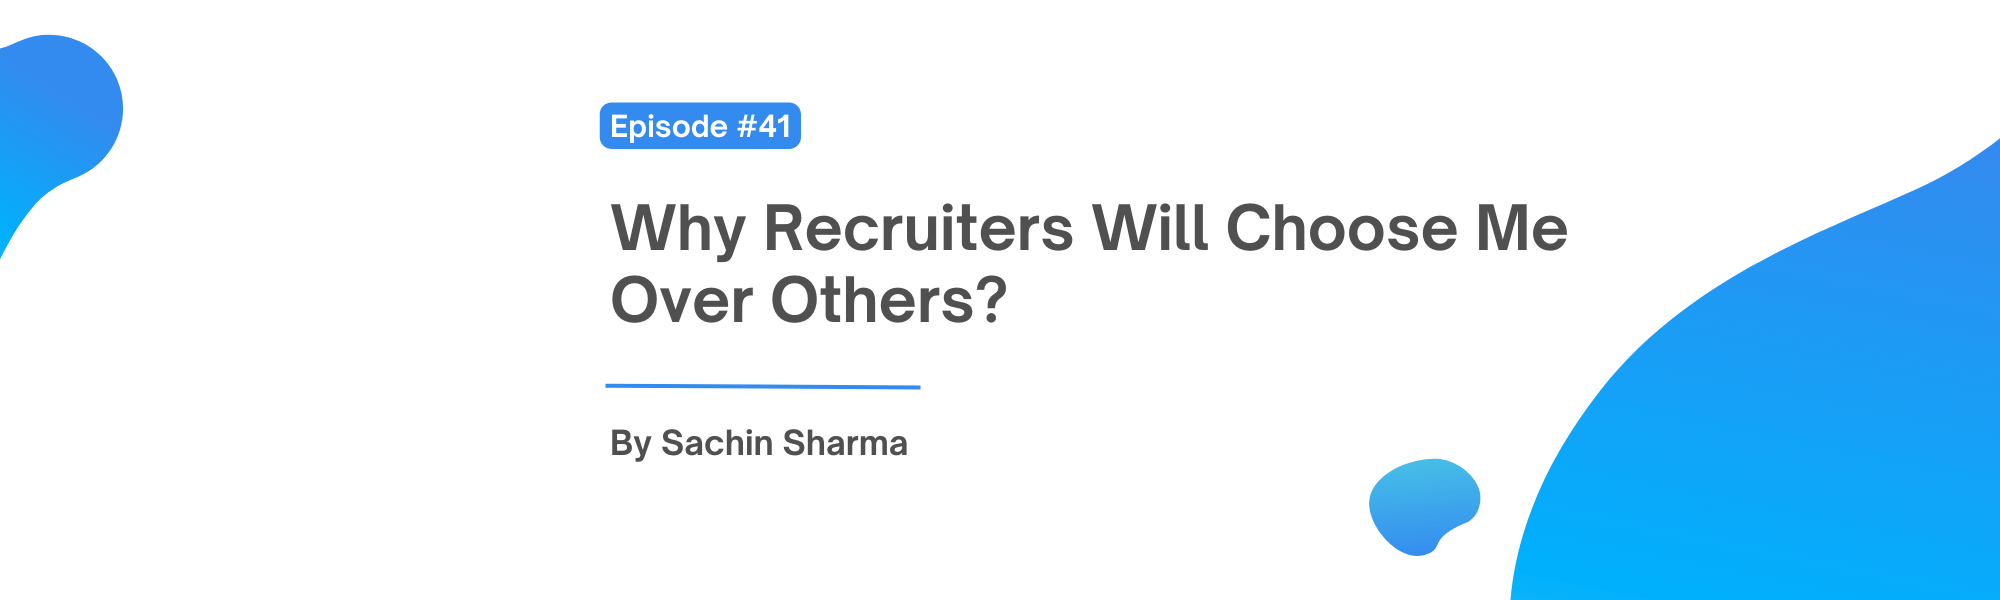 Why Recruiters Will Choose Me Over Others?